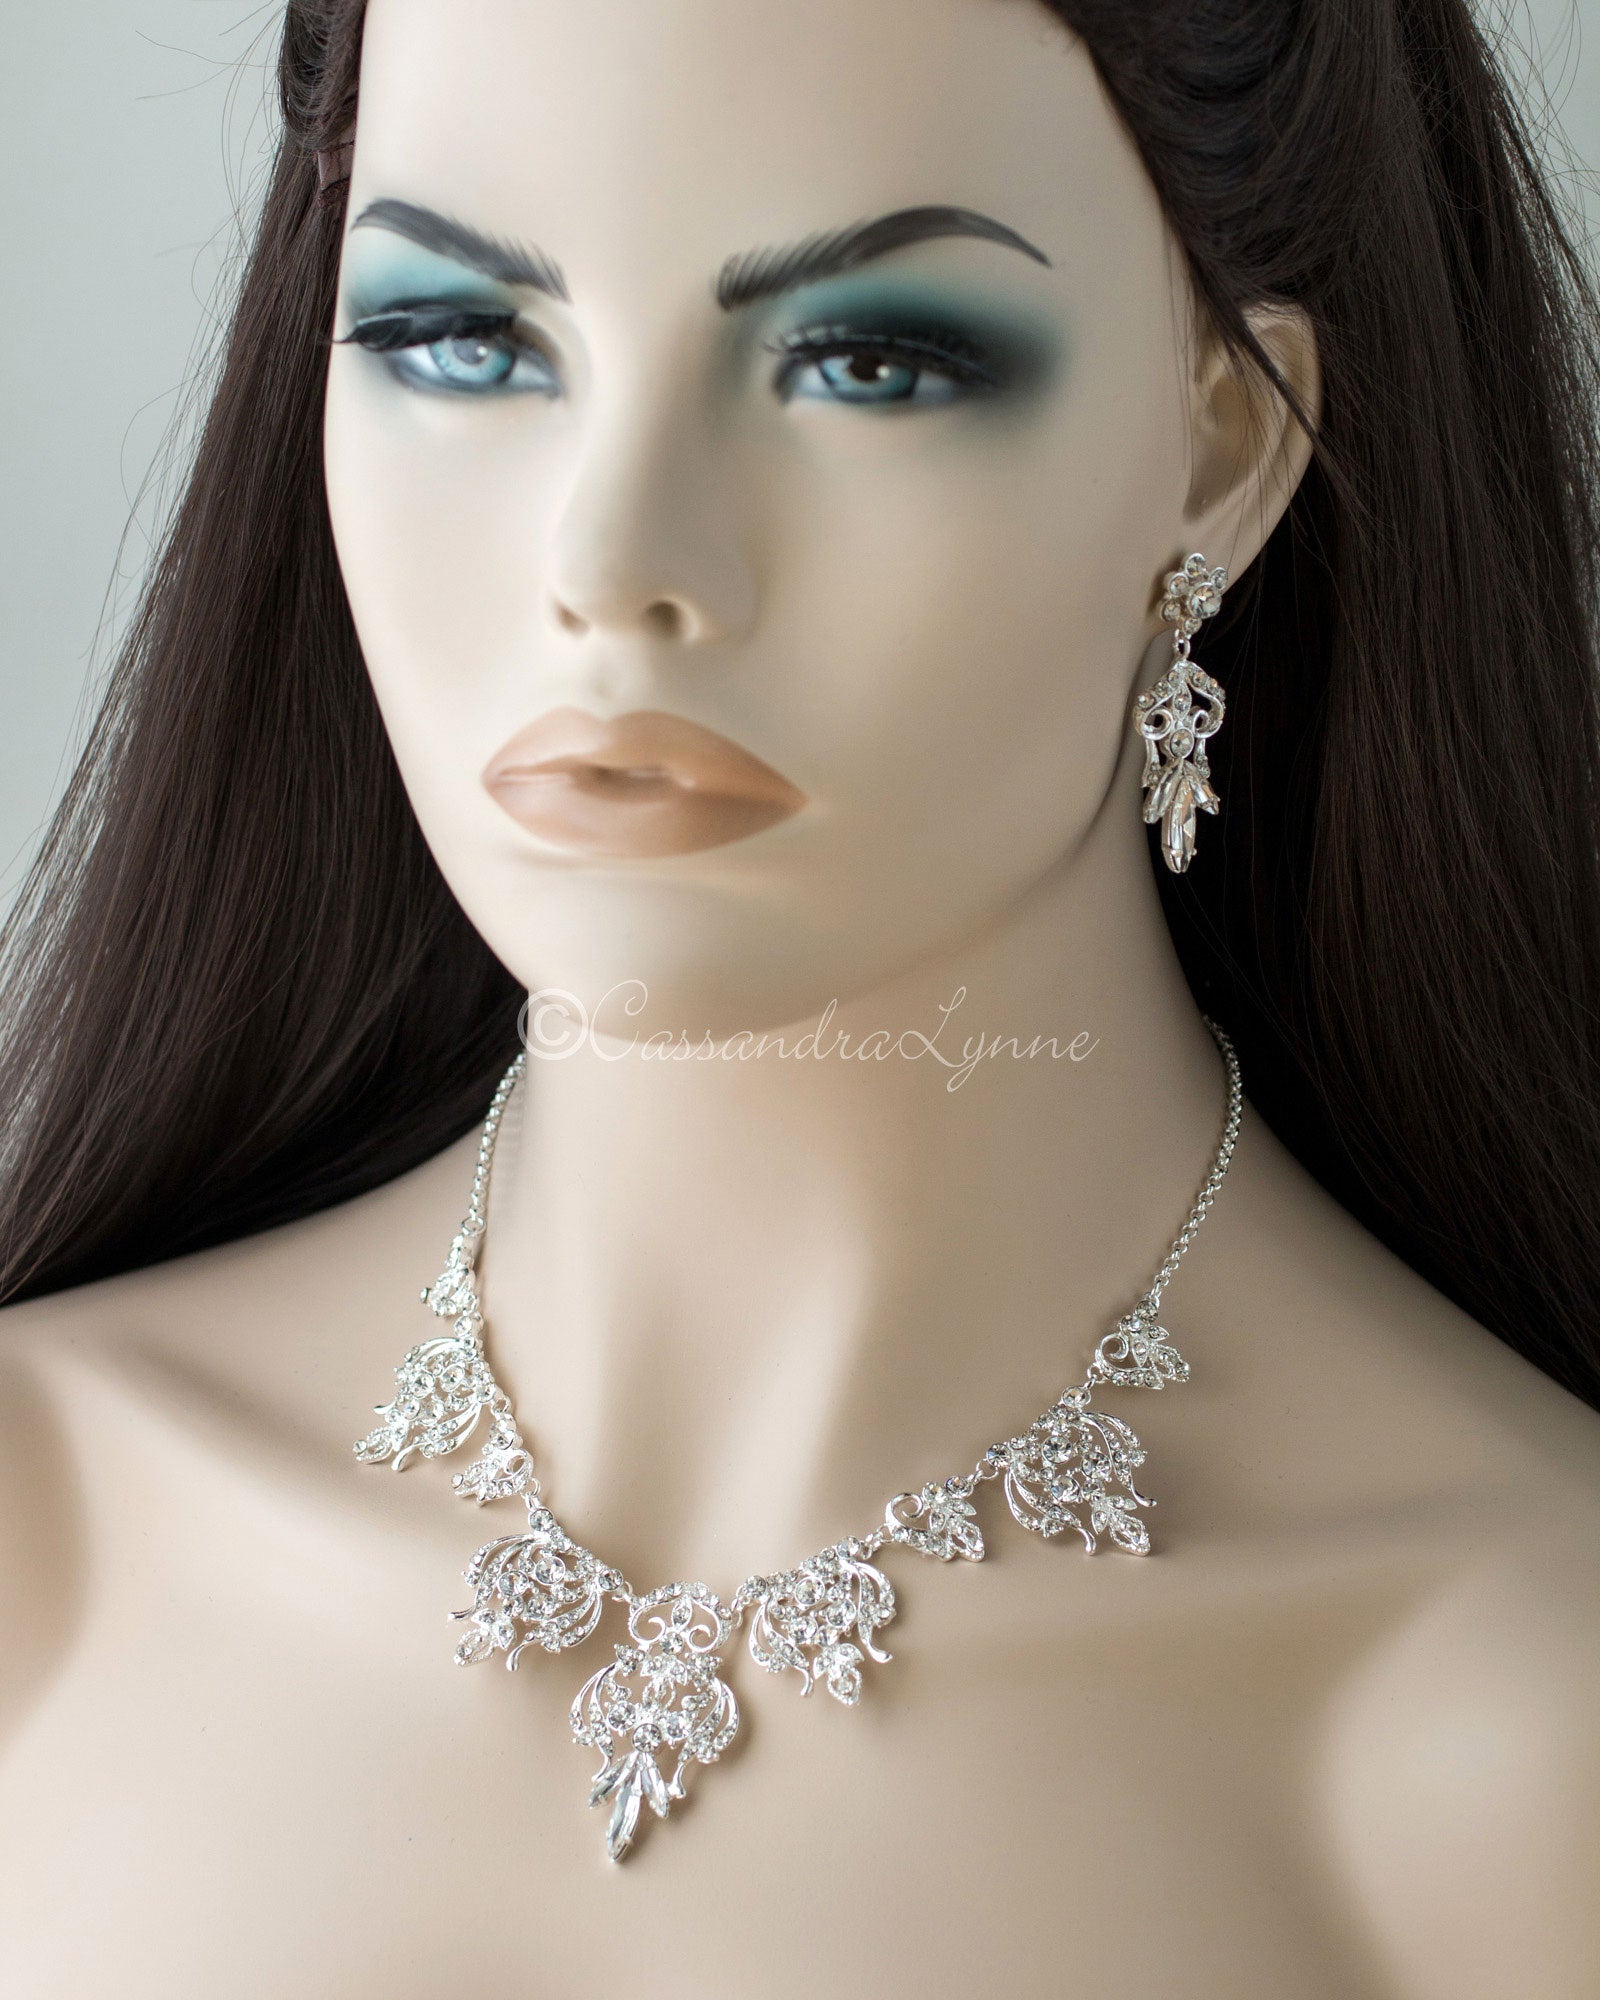 Exquisite Diamond and Flower Necklace - Bridal Jewelry - PinkOrchidFashion